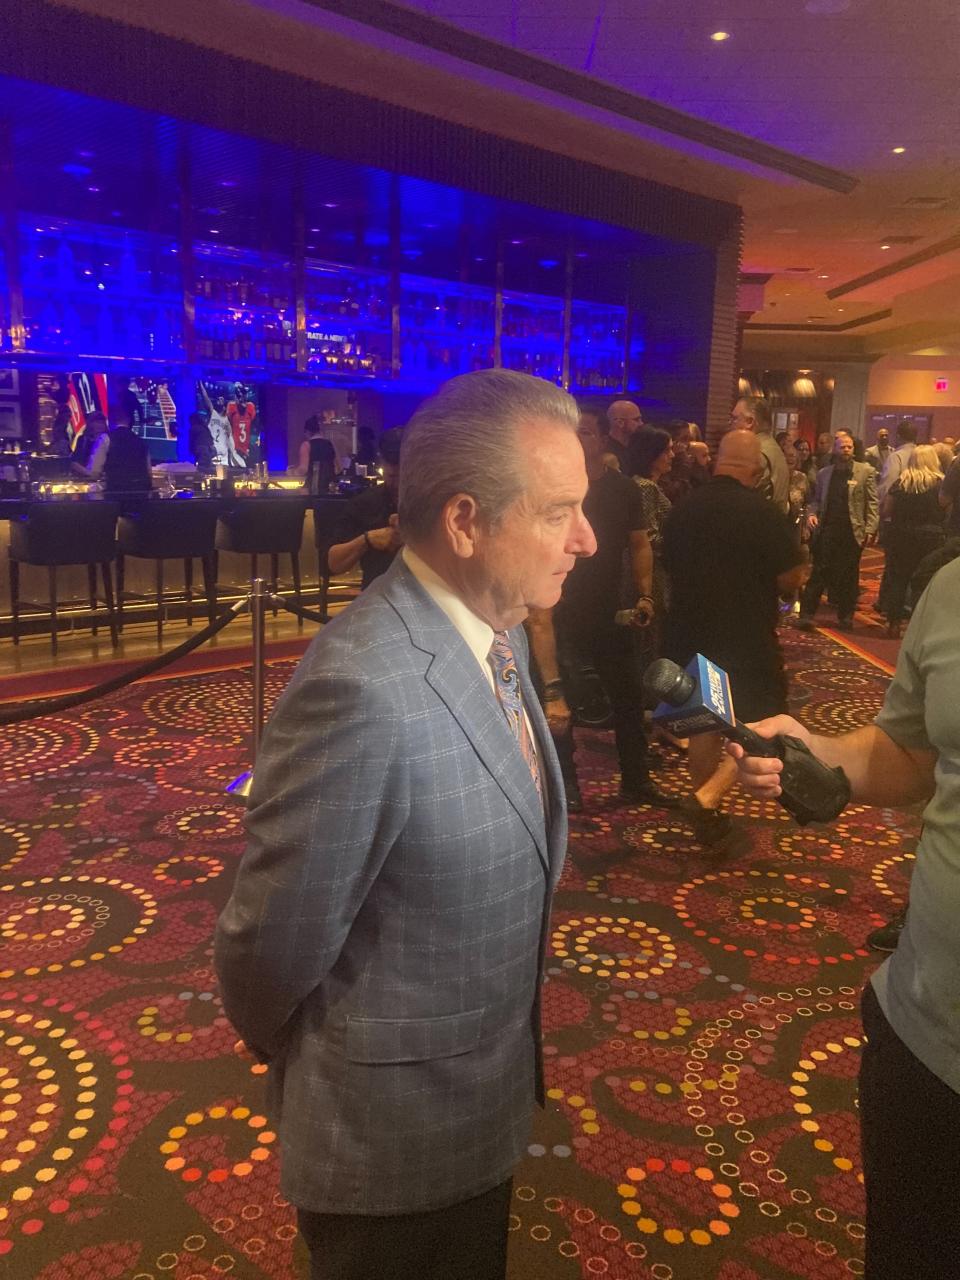 Celebrities and sports bettors celebrate the opening of a sports wagering at Seminole Hard Rock Hotel & Casino in Hollywood.